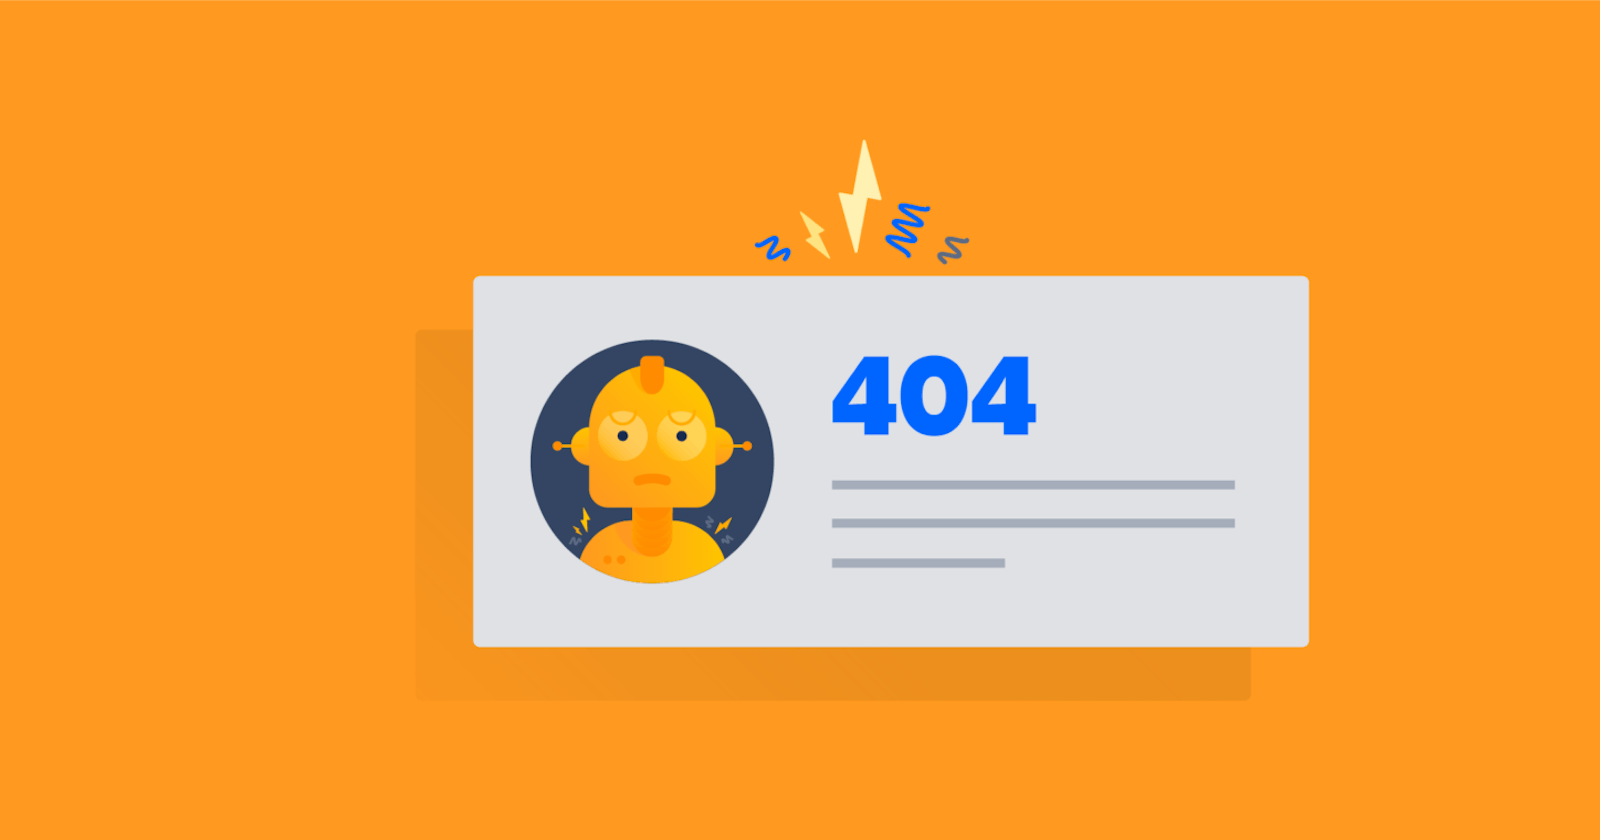 The history behind the Error 404. Why do we call Error 404 as "404"?